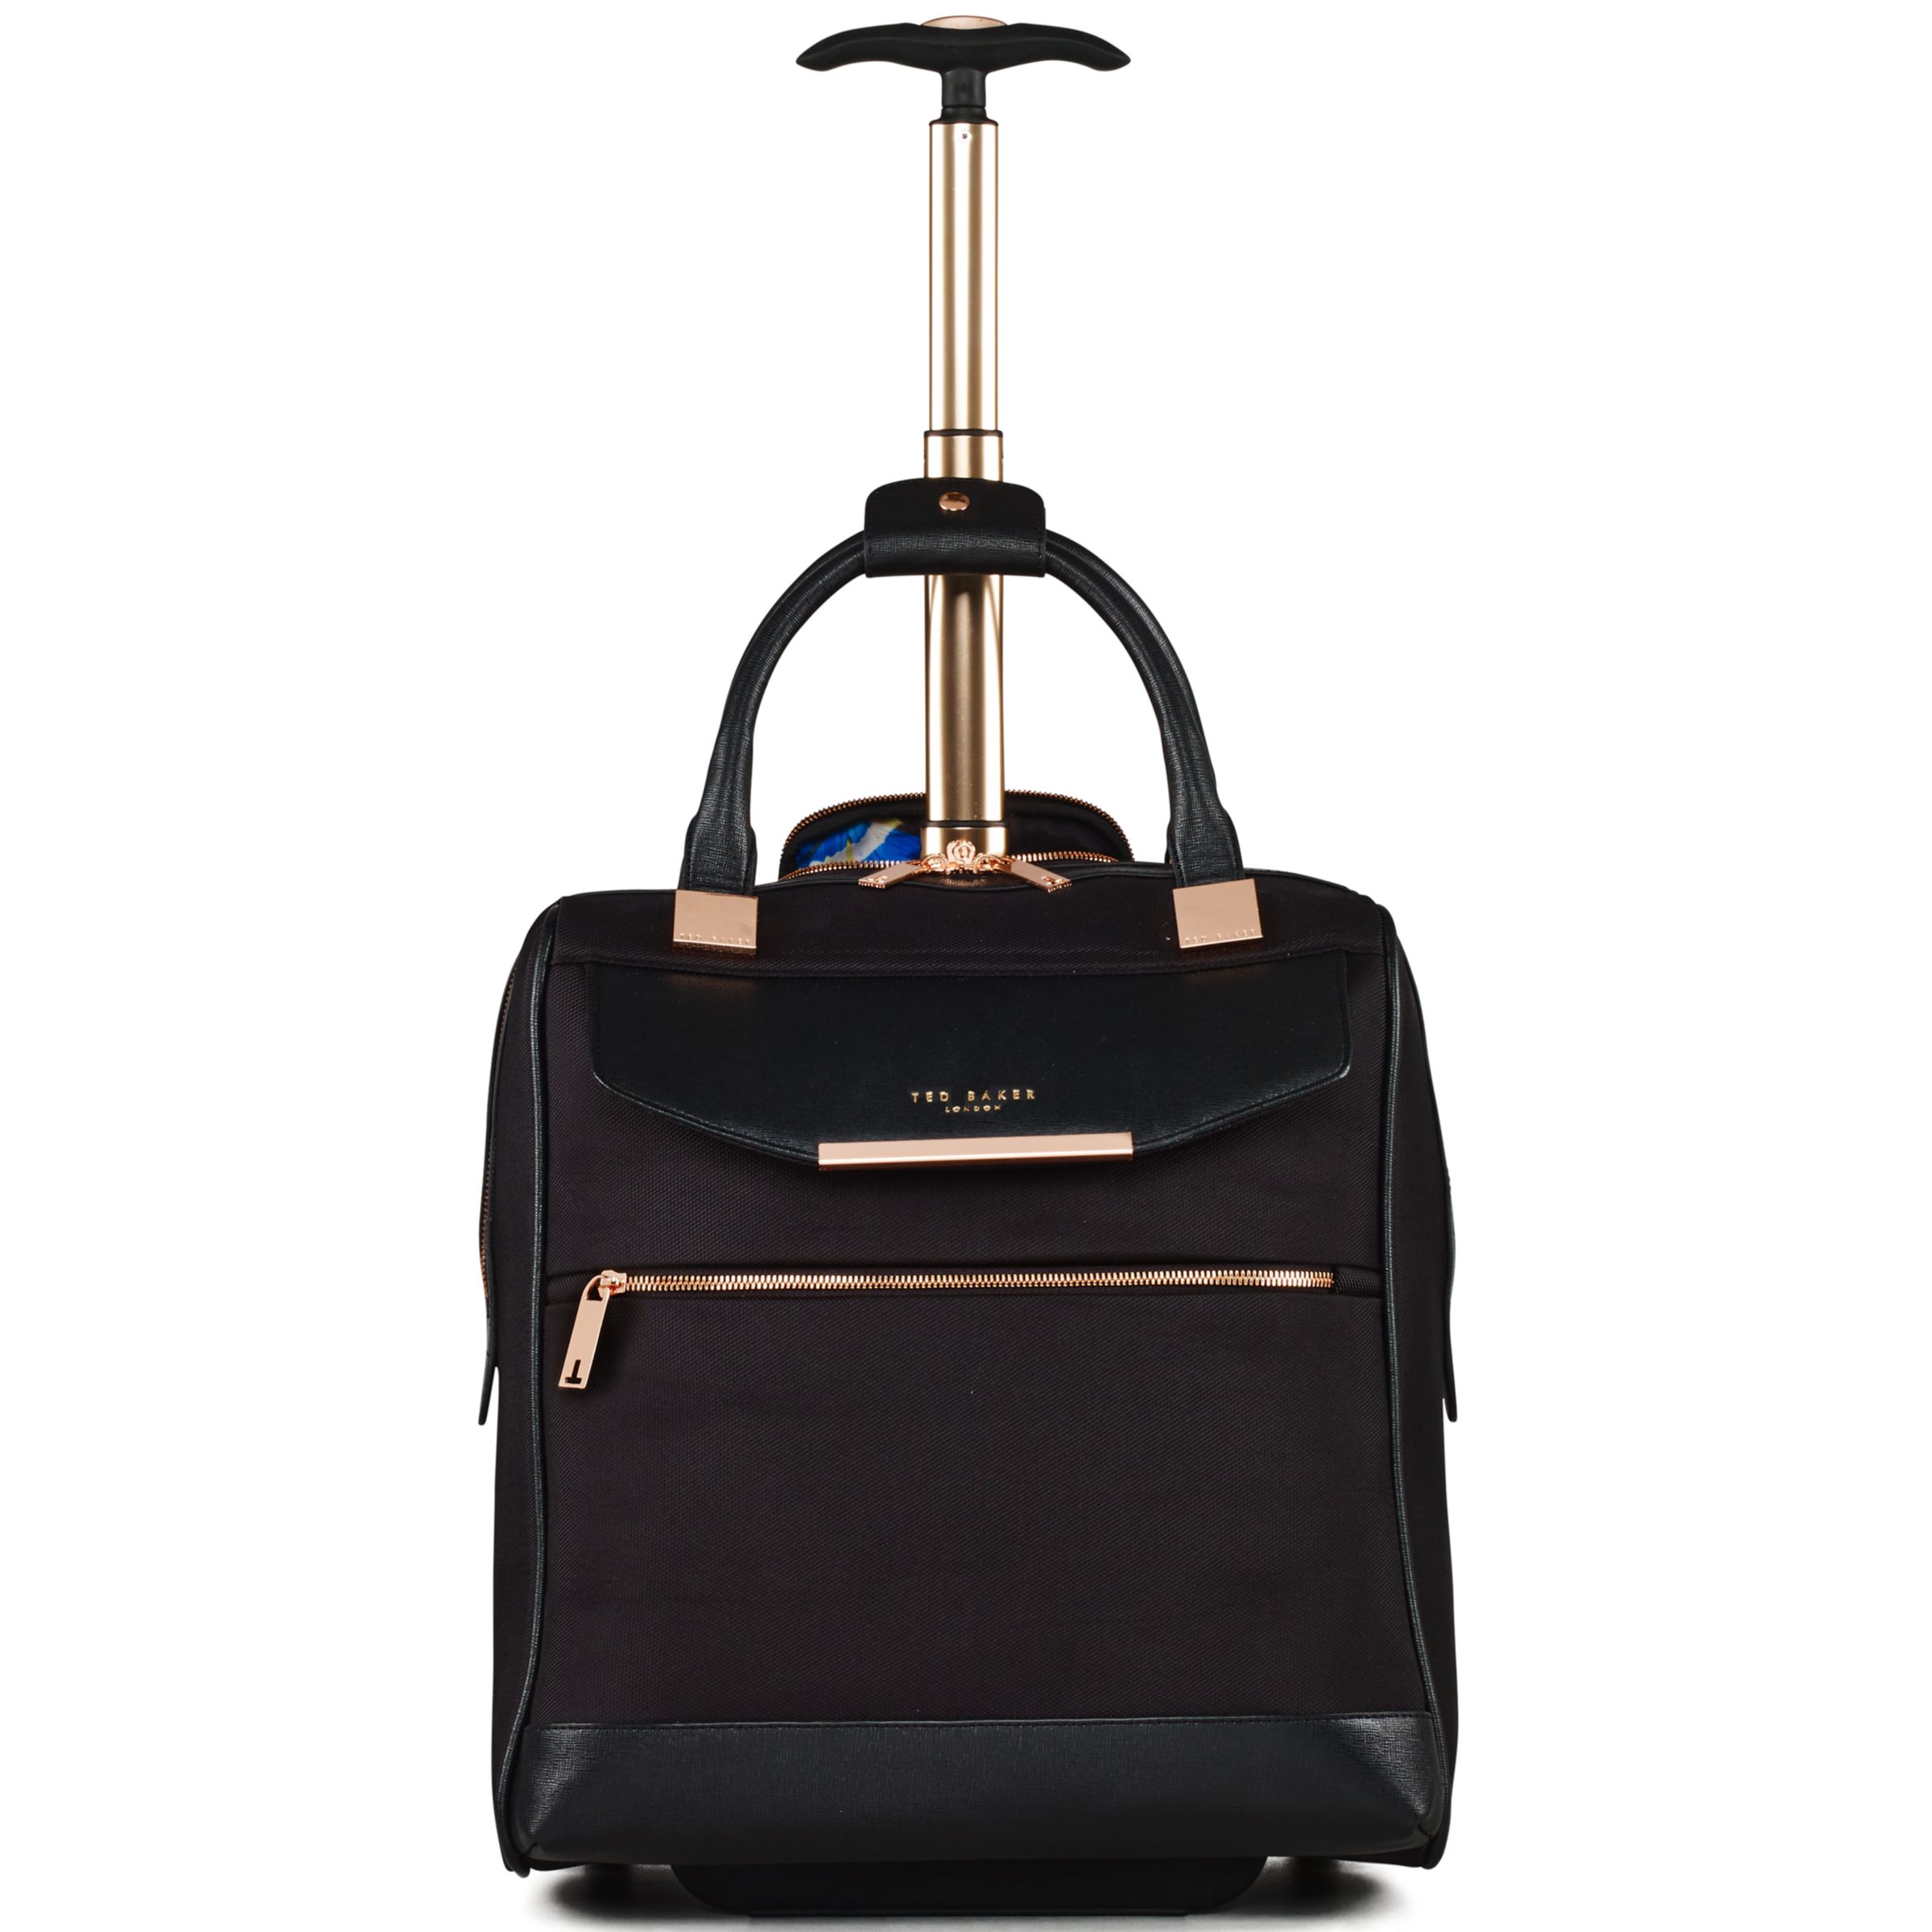 ted baker travel bag with wheels